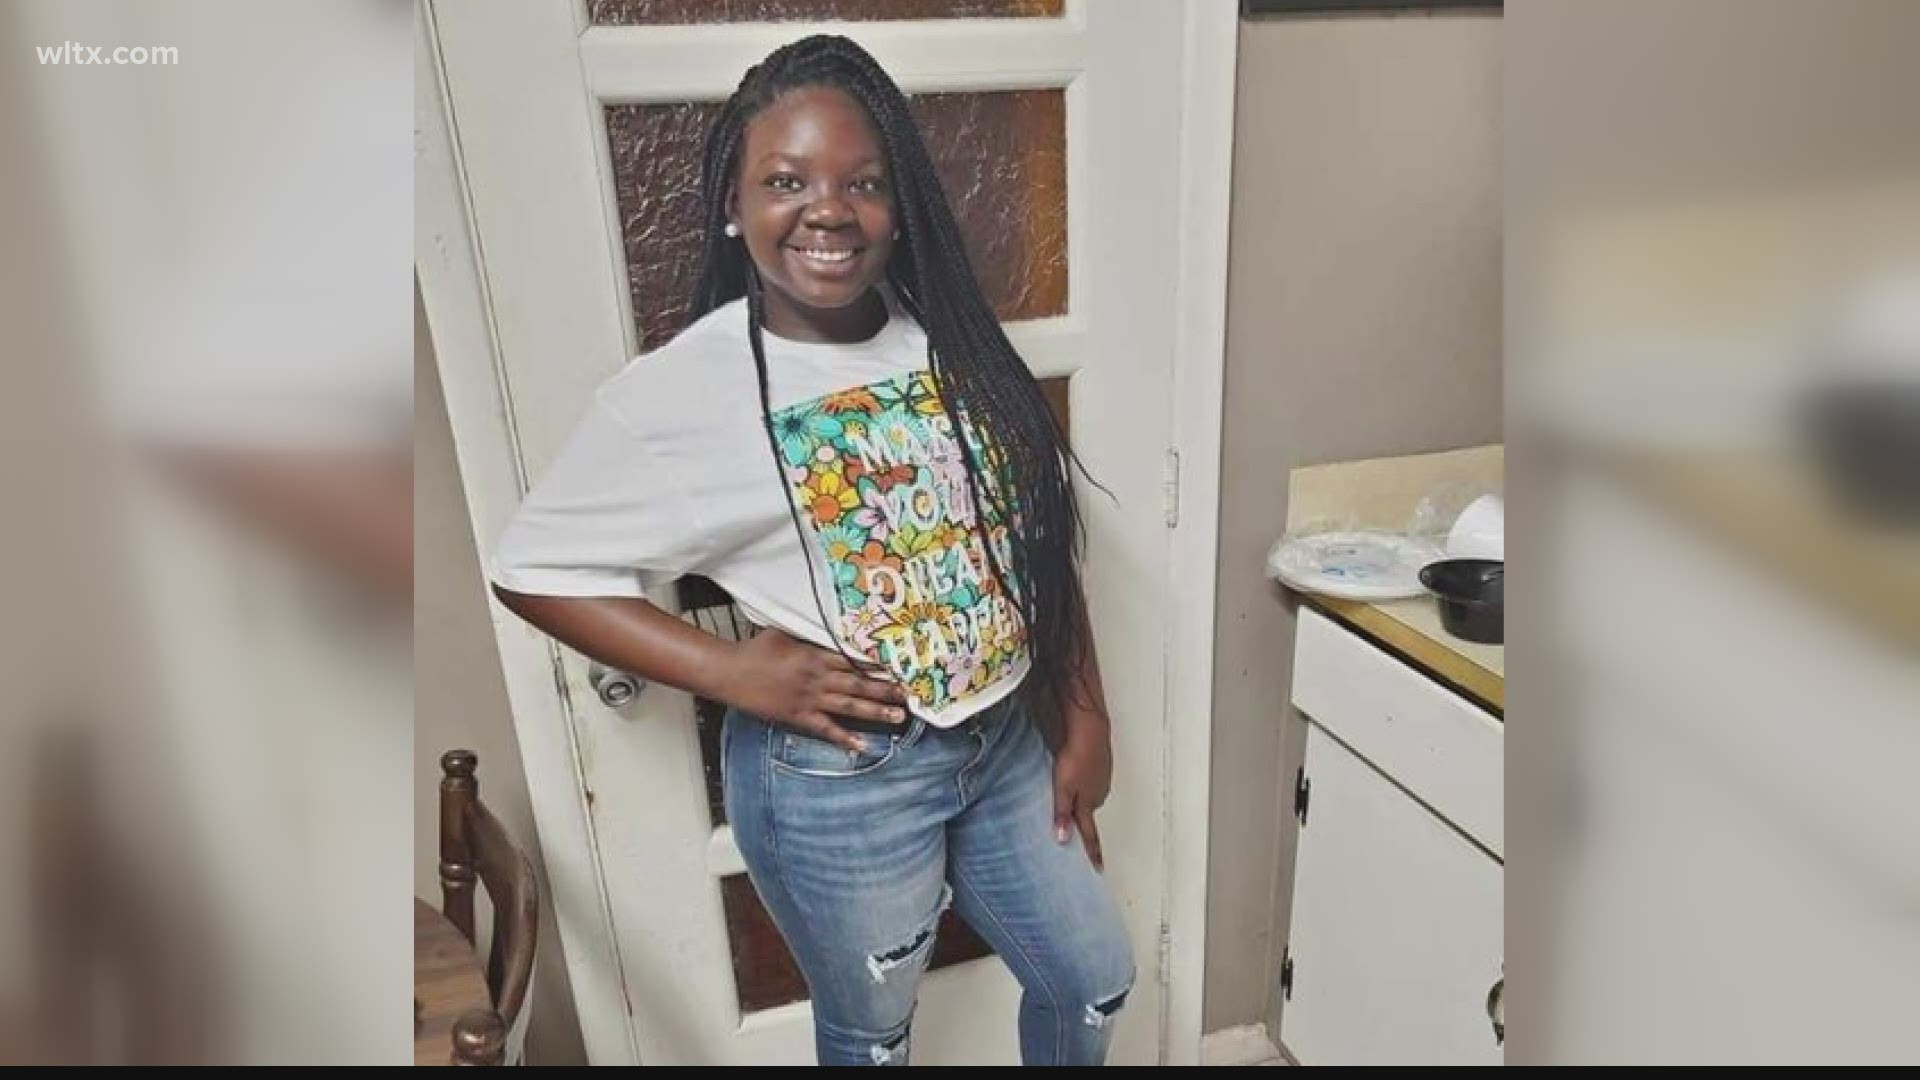 Officers say 11-year-old Tashya Jay was at a friend's home when stray bullets came into the house, striking and killing her.